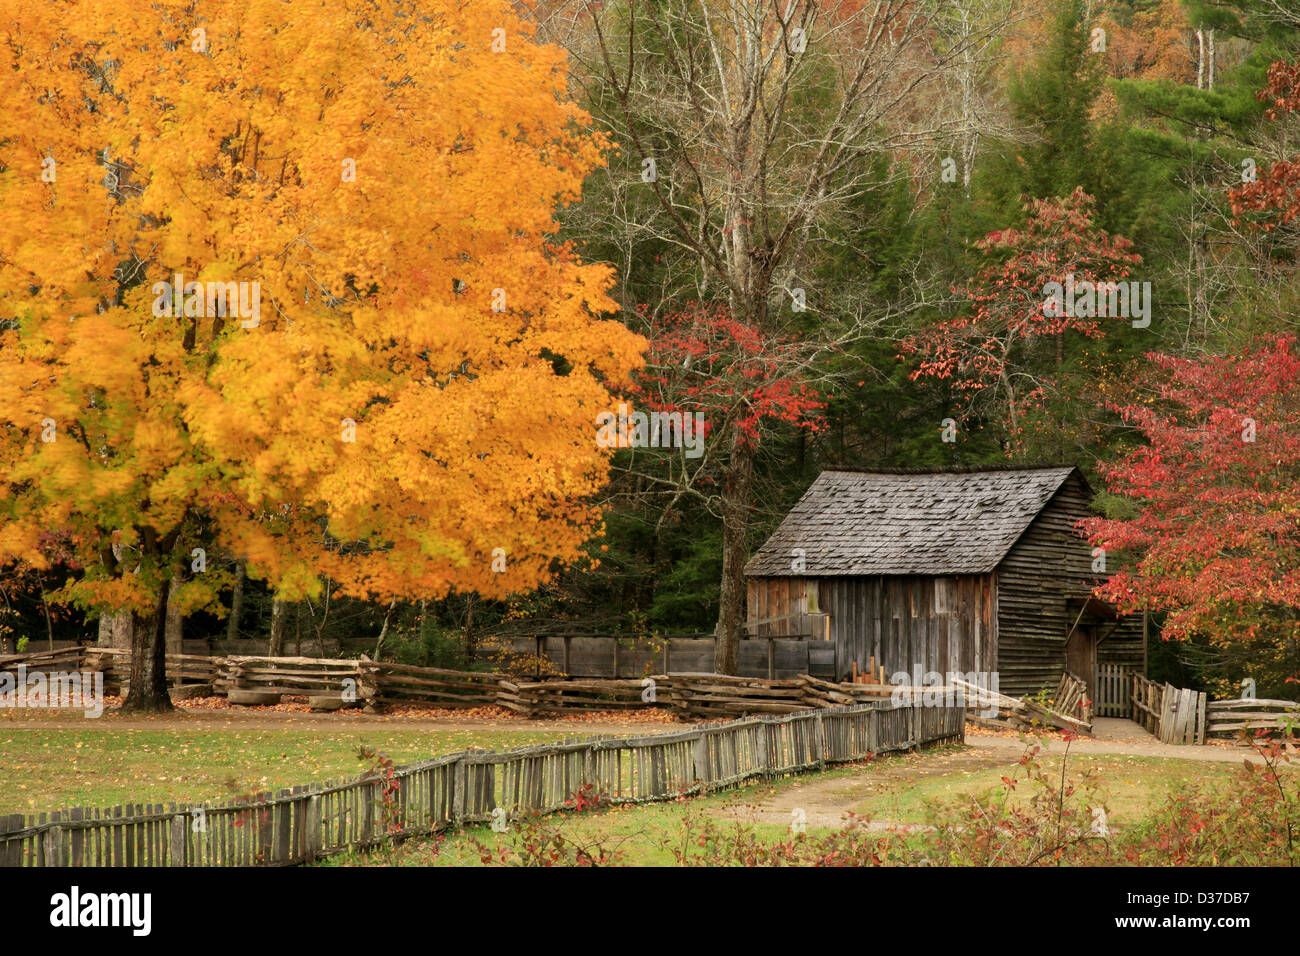 John Cable Mill, Cades Cove, Great Smoky Mountains National Park, Tennessee, autumn Stock Photo